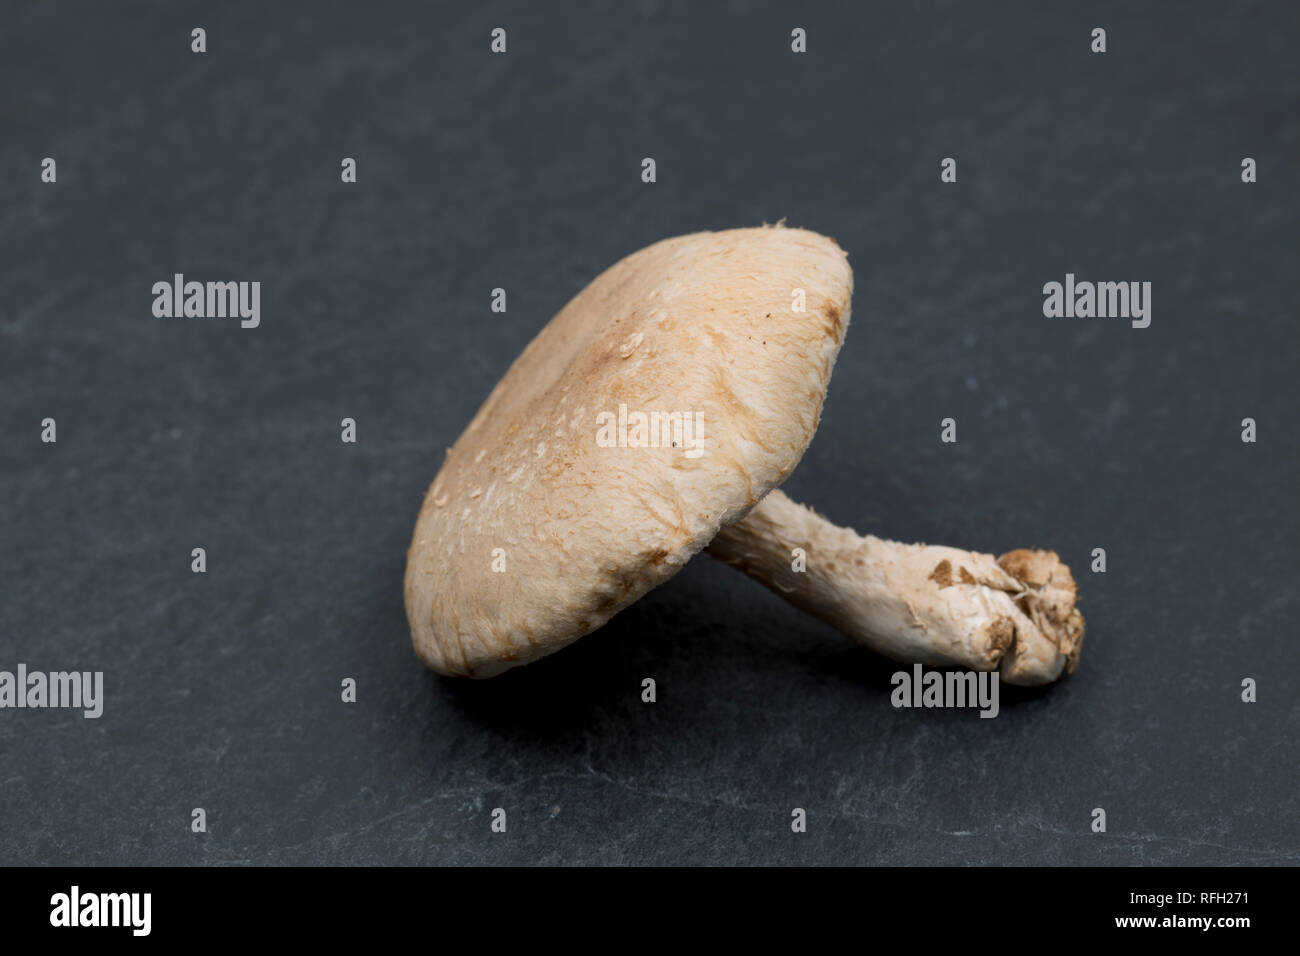 A single uncooked shiitake mushroom bought from a supermarket in the Uk on a dark background. Dorset England UK GB Stock Photo